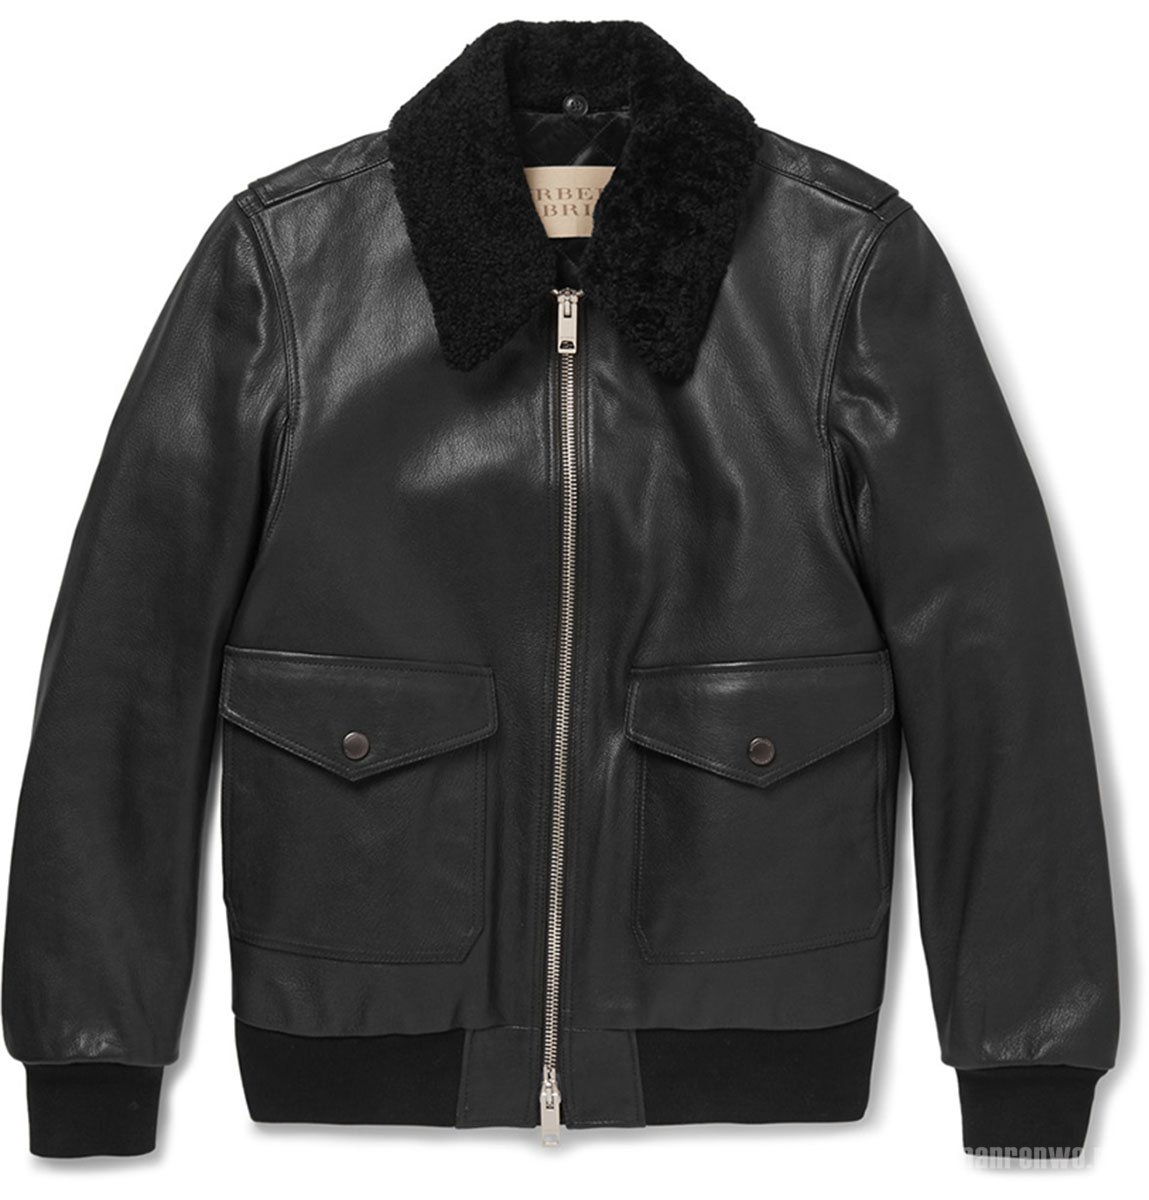 　Burberry Brit shearling leather jacket